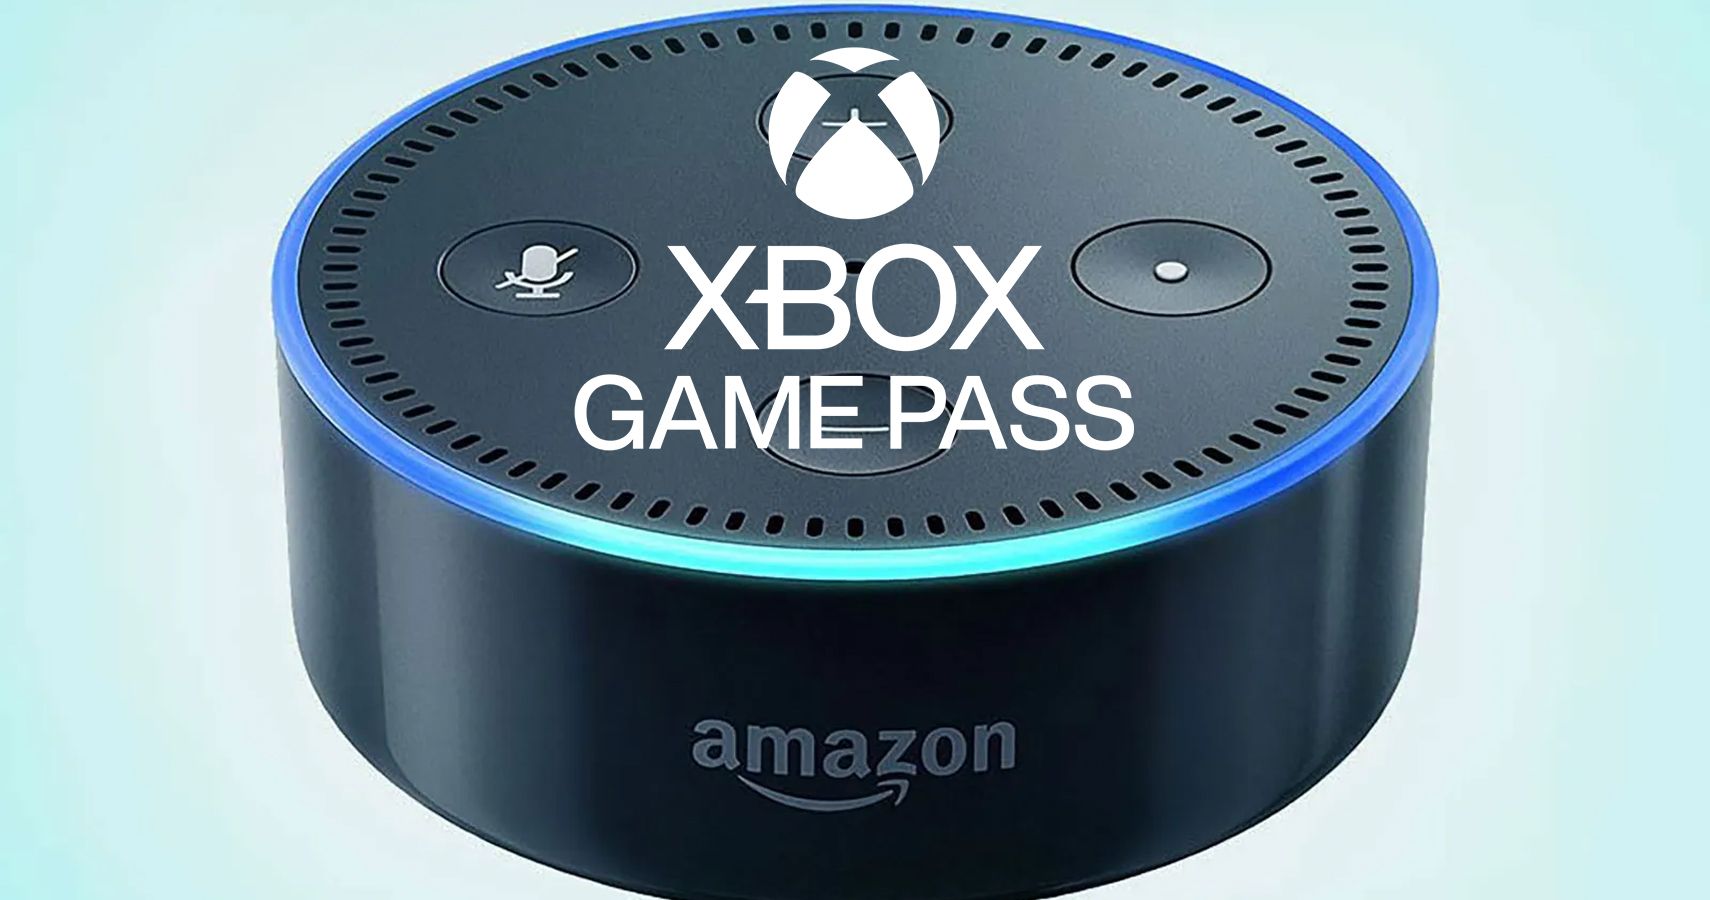 How to ask Alexa to download Xbox Game Pass video games - Gearbrain